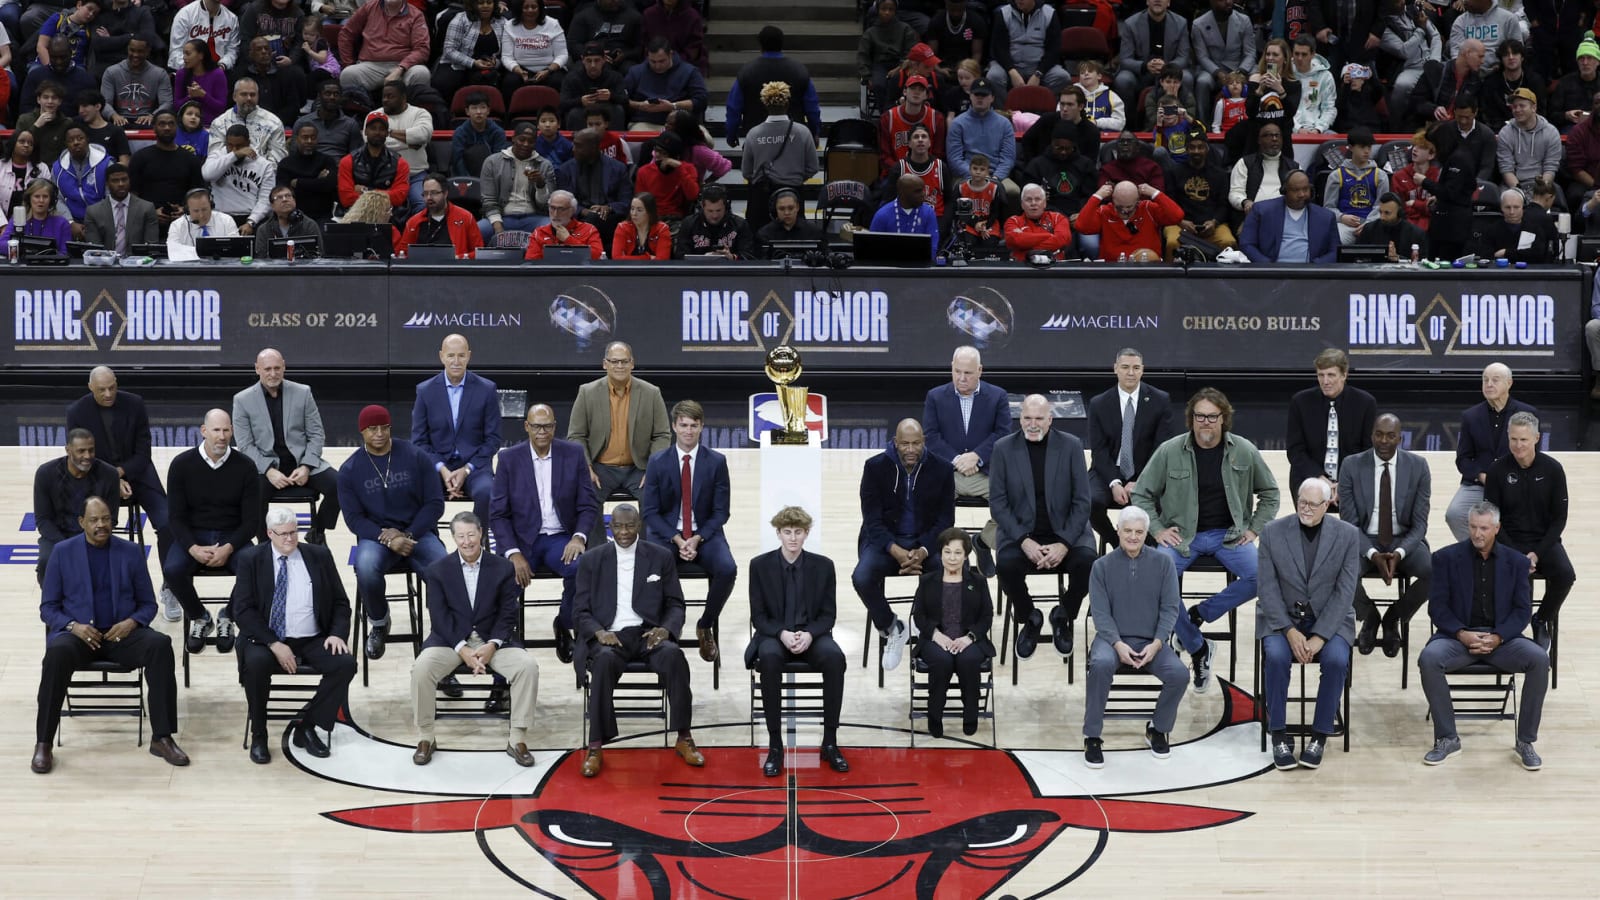 Bulls fans ripped for 'shameful' act at Ring of Honor ceremony